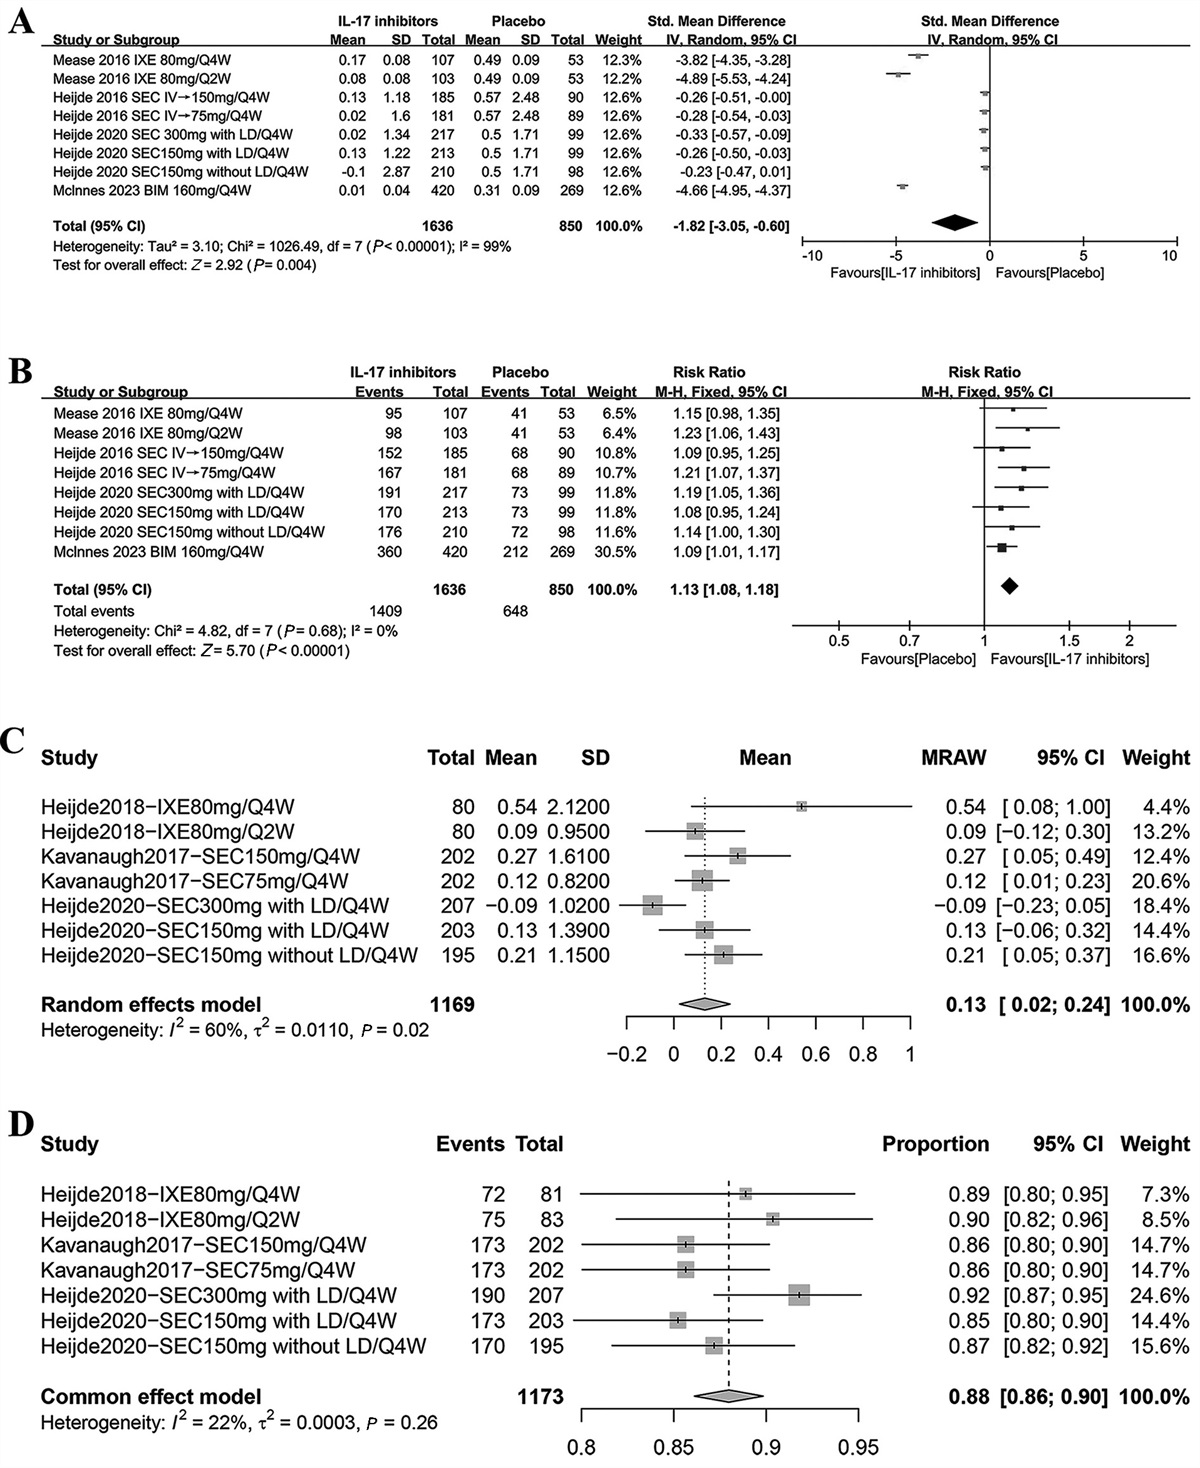 Efficacy of interleukin-17 inhibitors on radiographic progression in psoriatic arthritis: A systematic review and meta-analysis